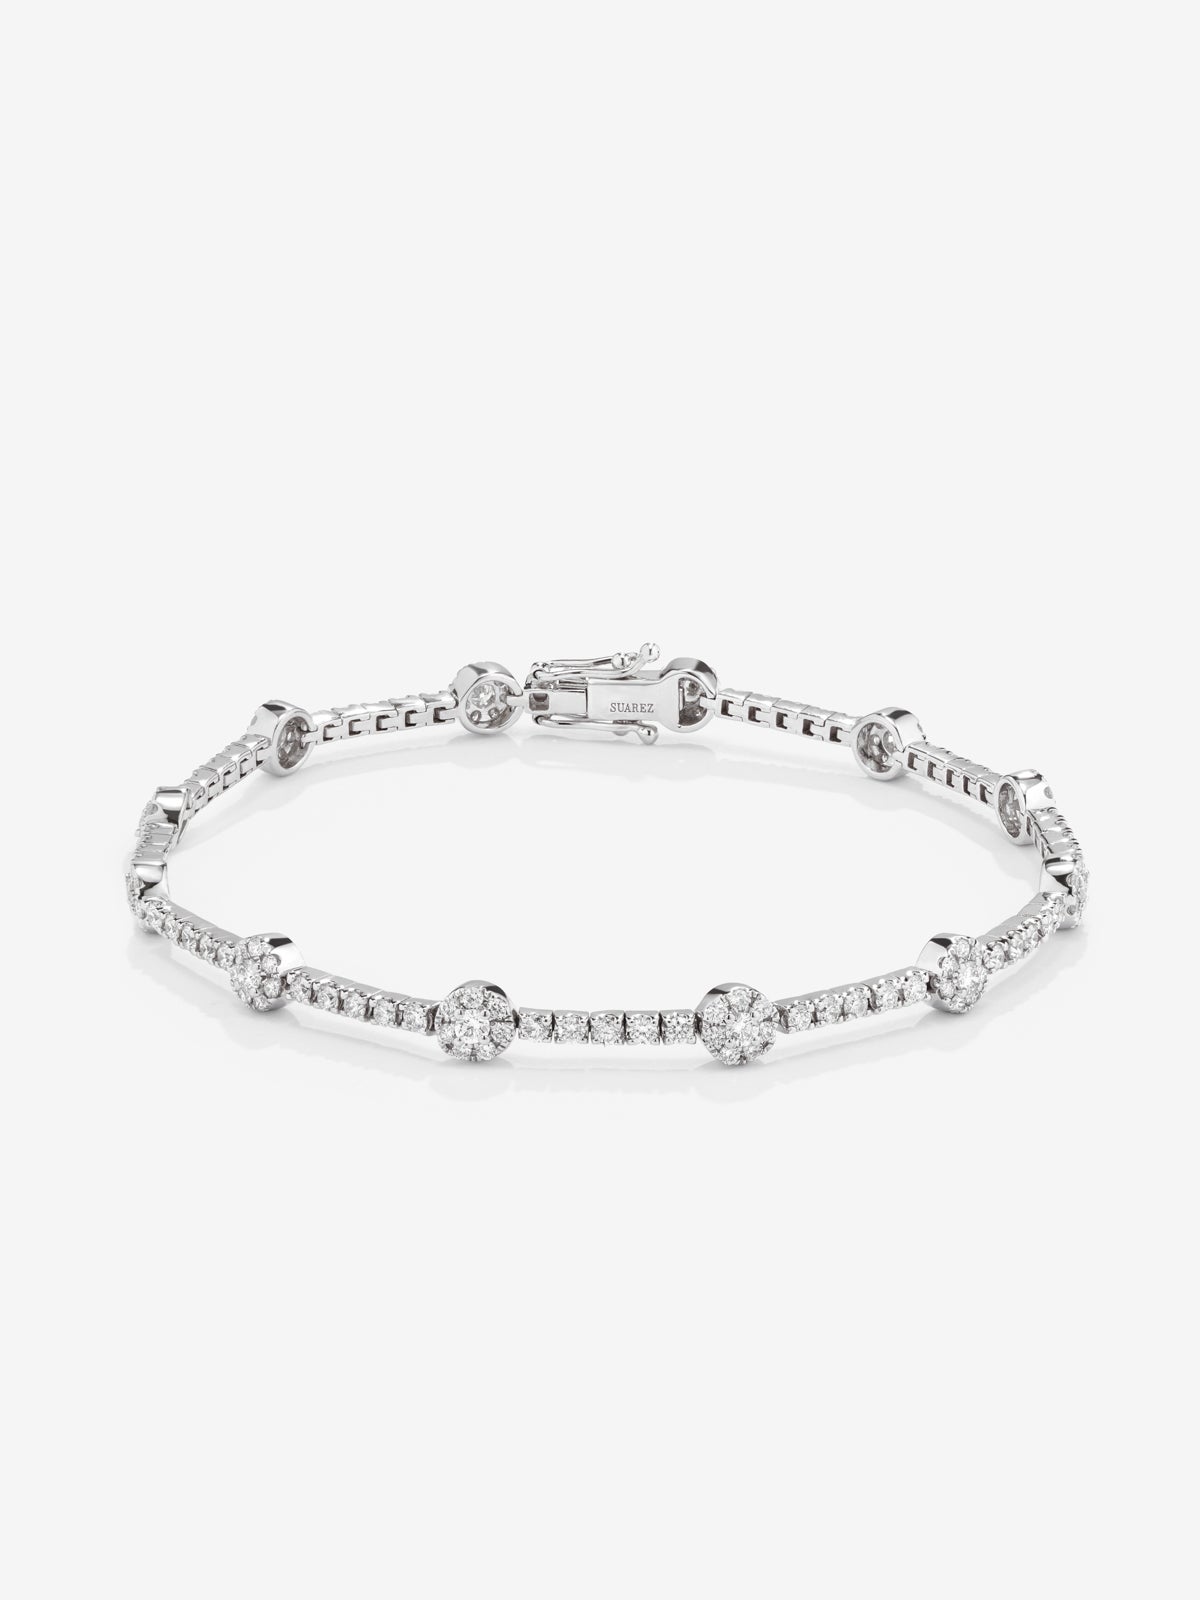 18K white gold rivière bracelet with 155 brilliant-cut diamonds with a total of 2.09 cts